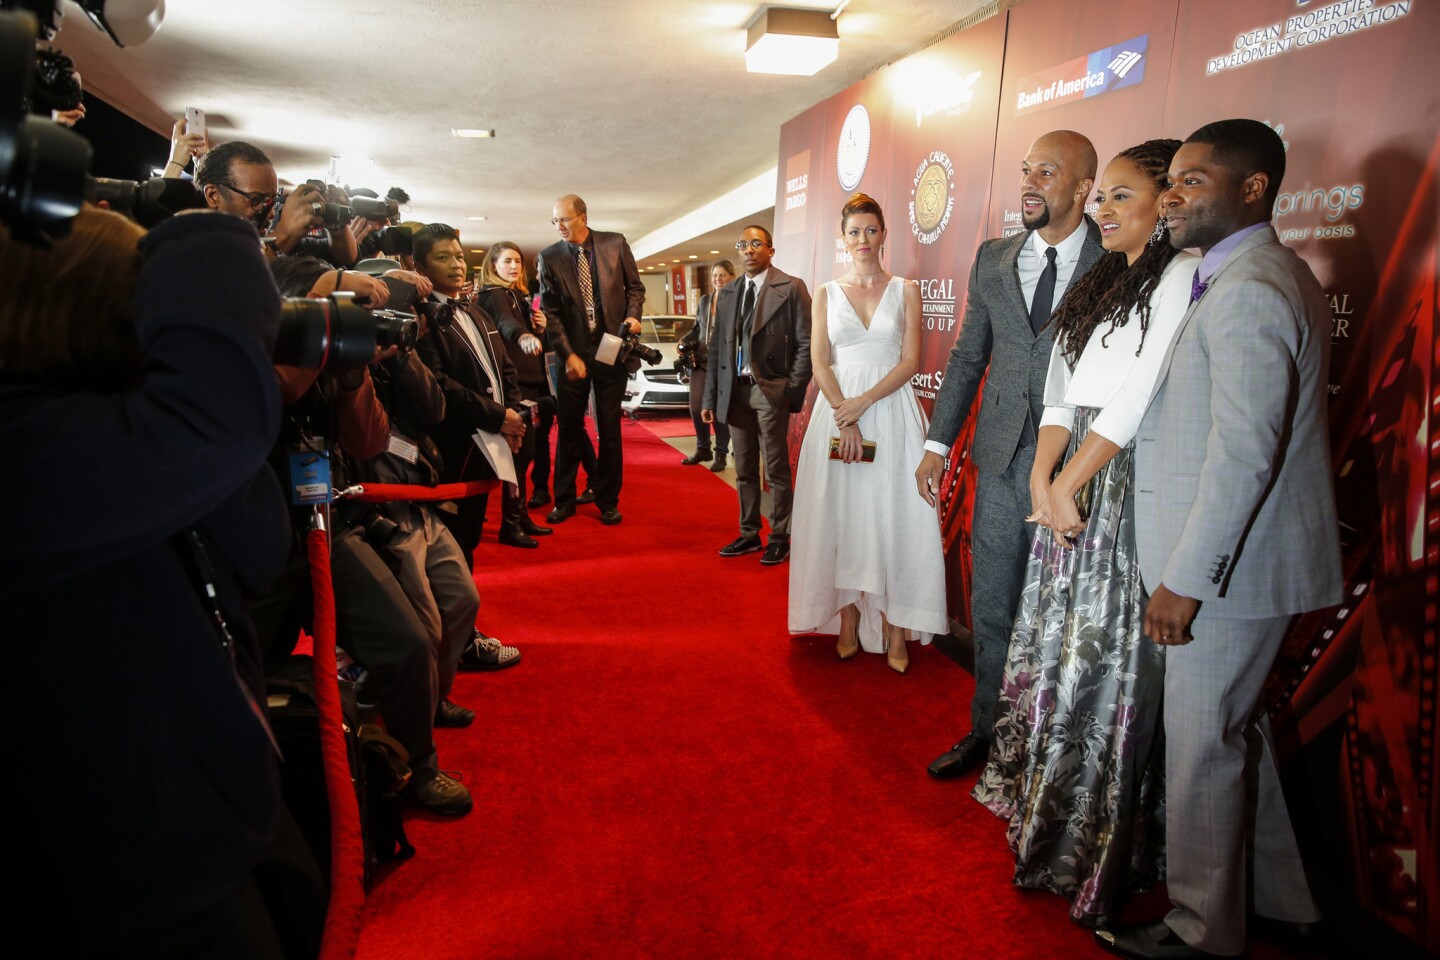 Director Ava DuVernay is surrounded by Common, left, and David Oyelowo on the red carpet for the premiere of "Selma" on opening night of the Palm Springs Film Festival. Oyelowo's wife, Jessica, is at left.